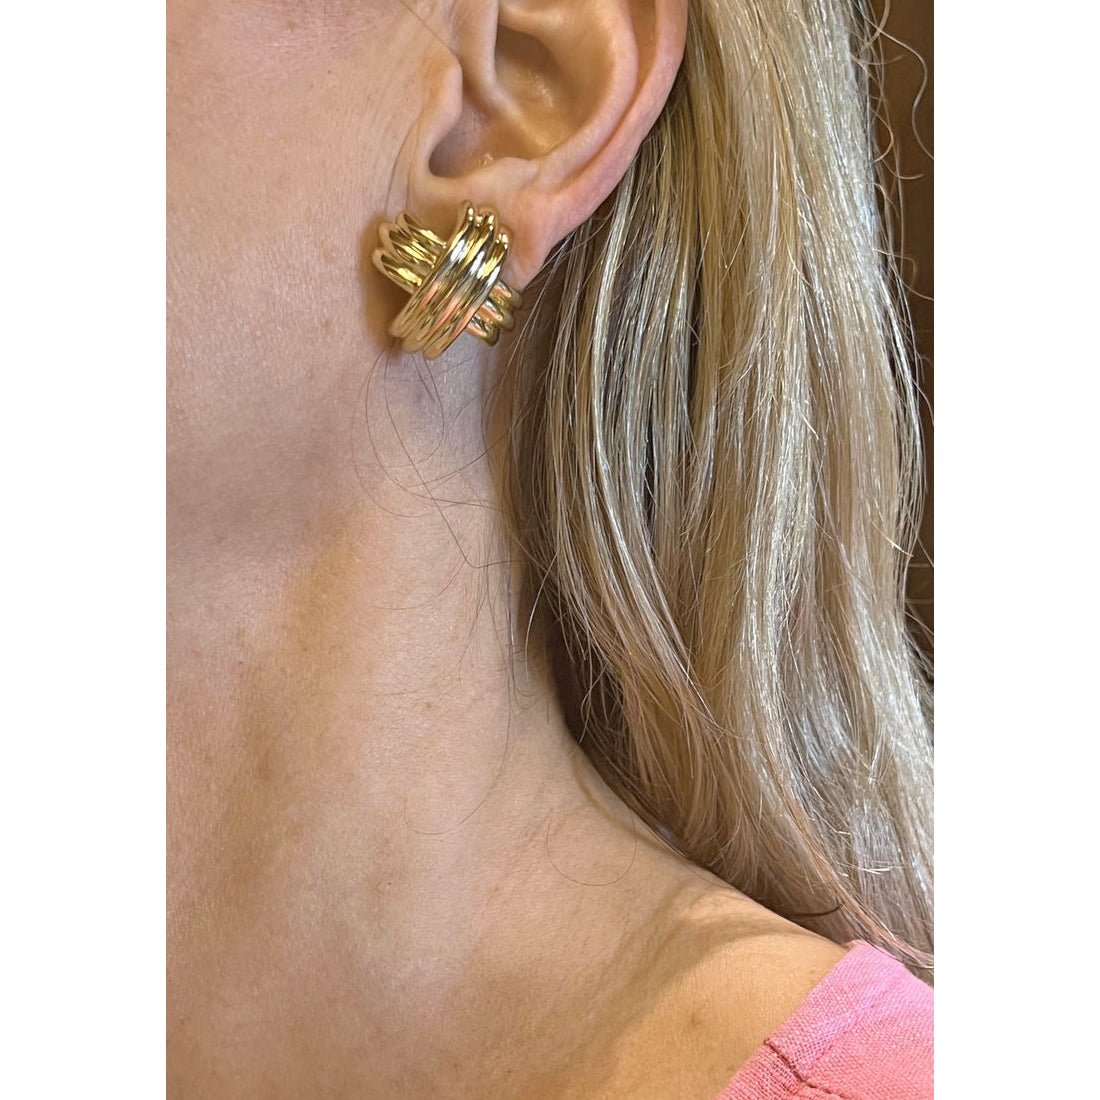 Signature Large Earring Backs in Gold